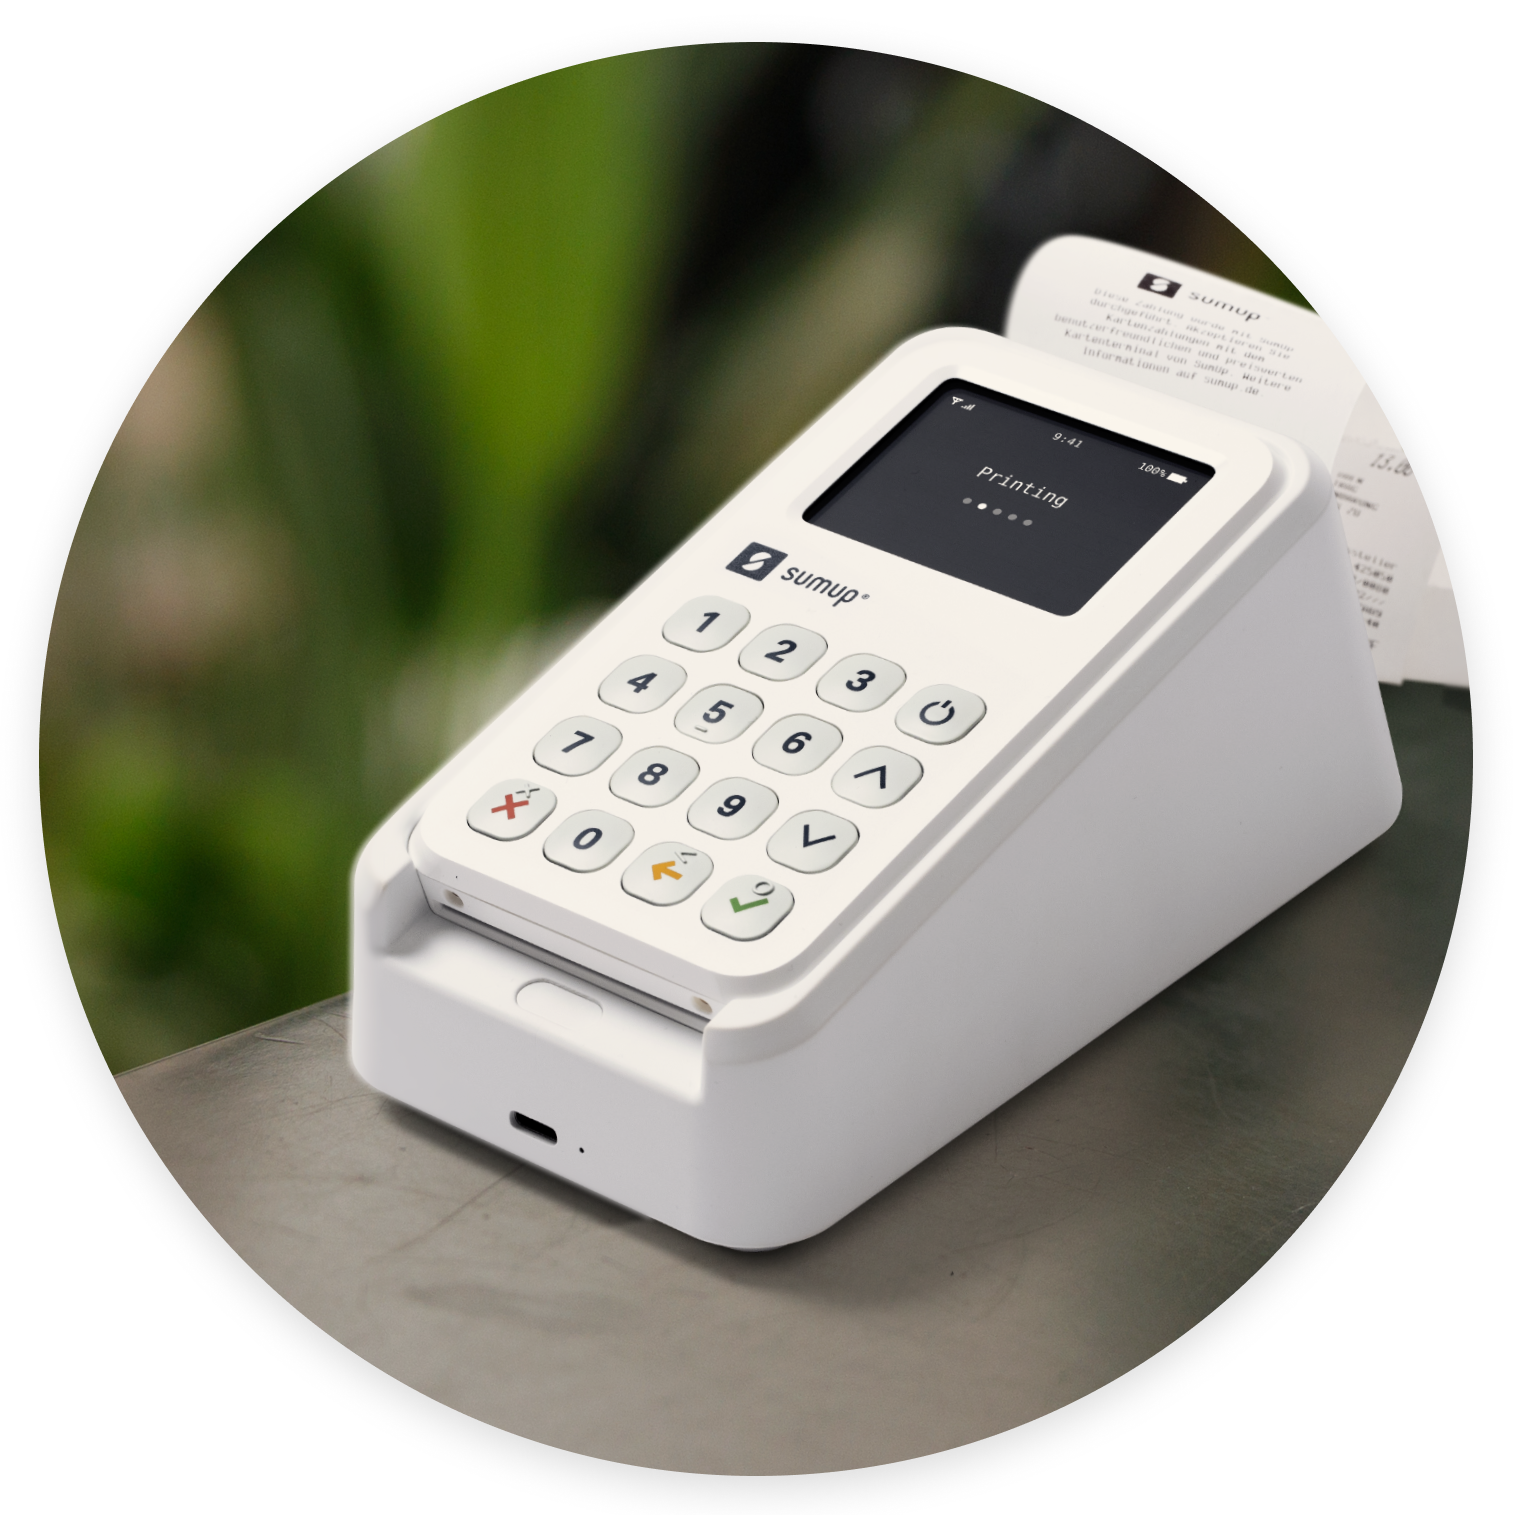 SumUp 3G Unlimited Data Mobile Card Terminal for India